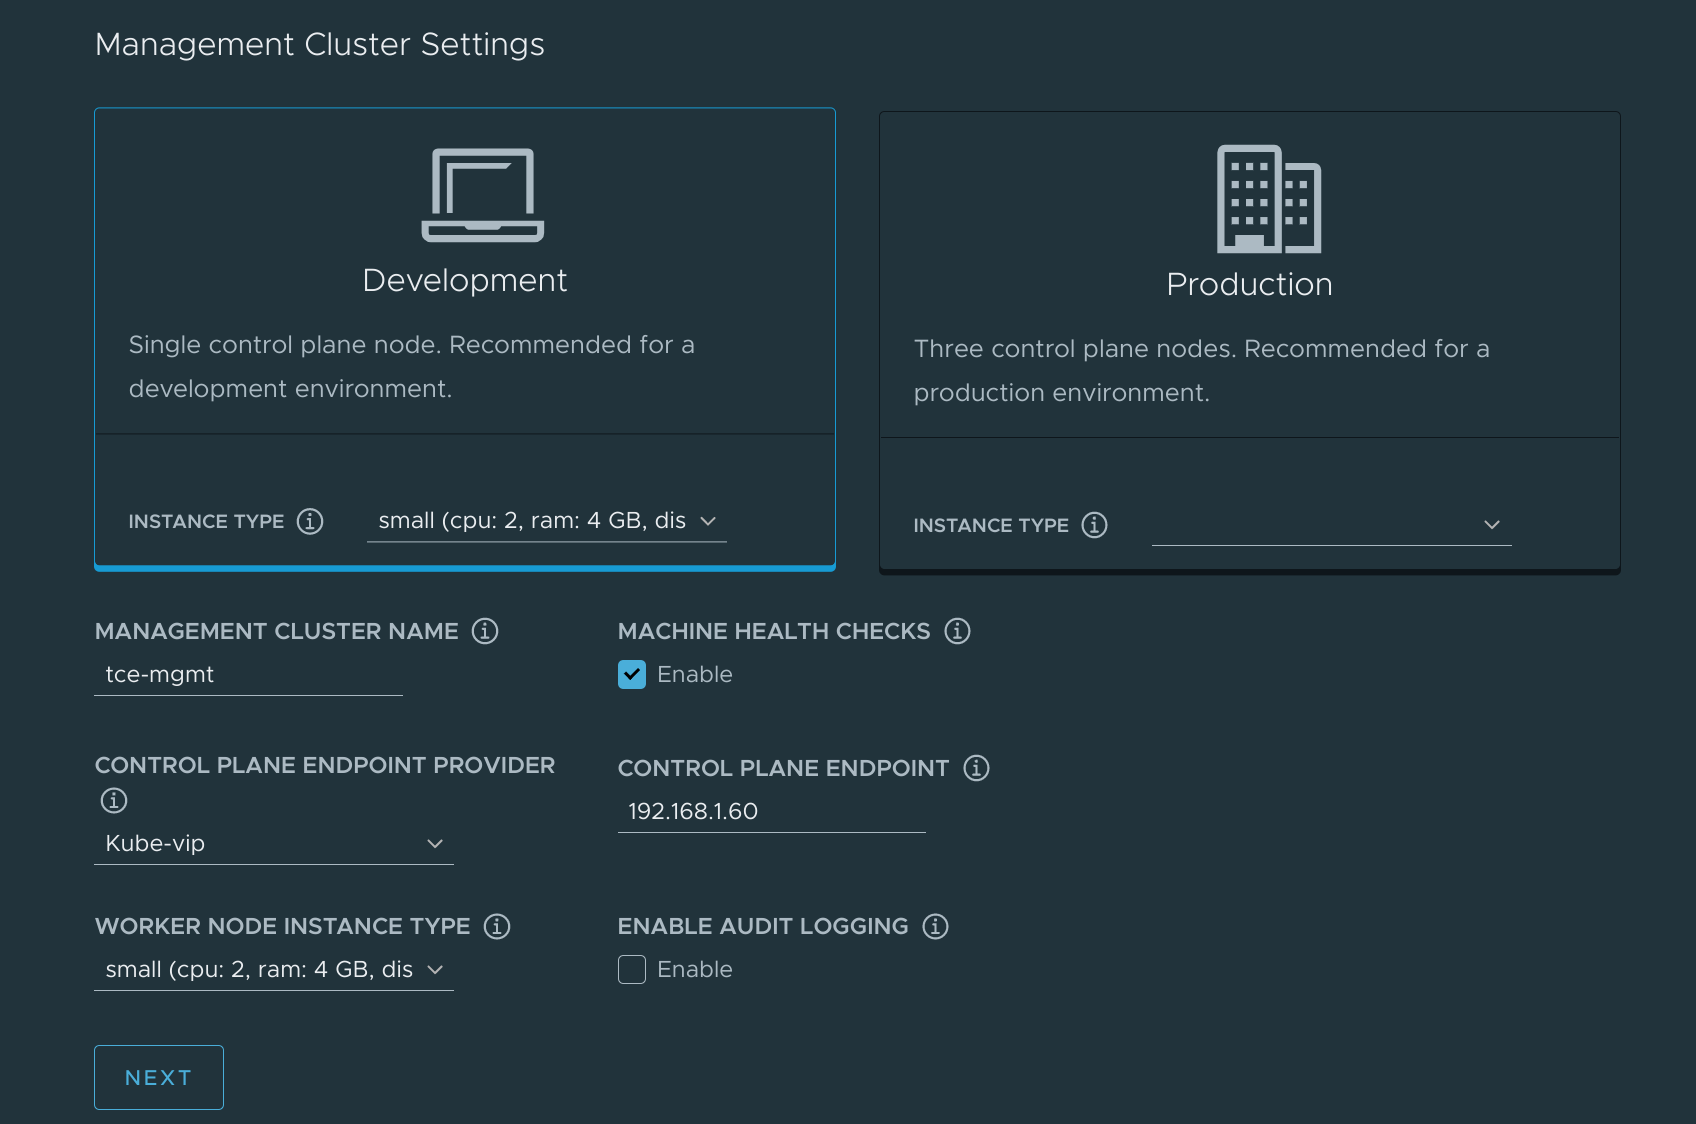 Configuring the Management Cluster